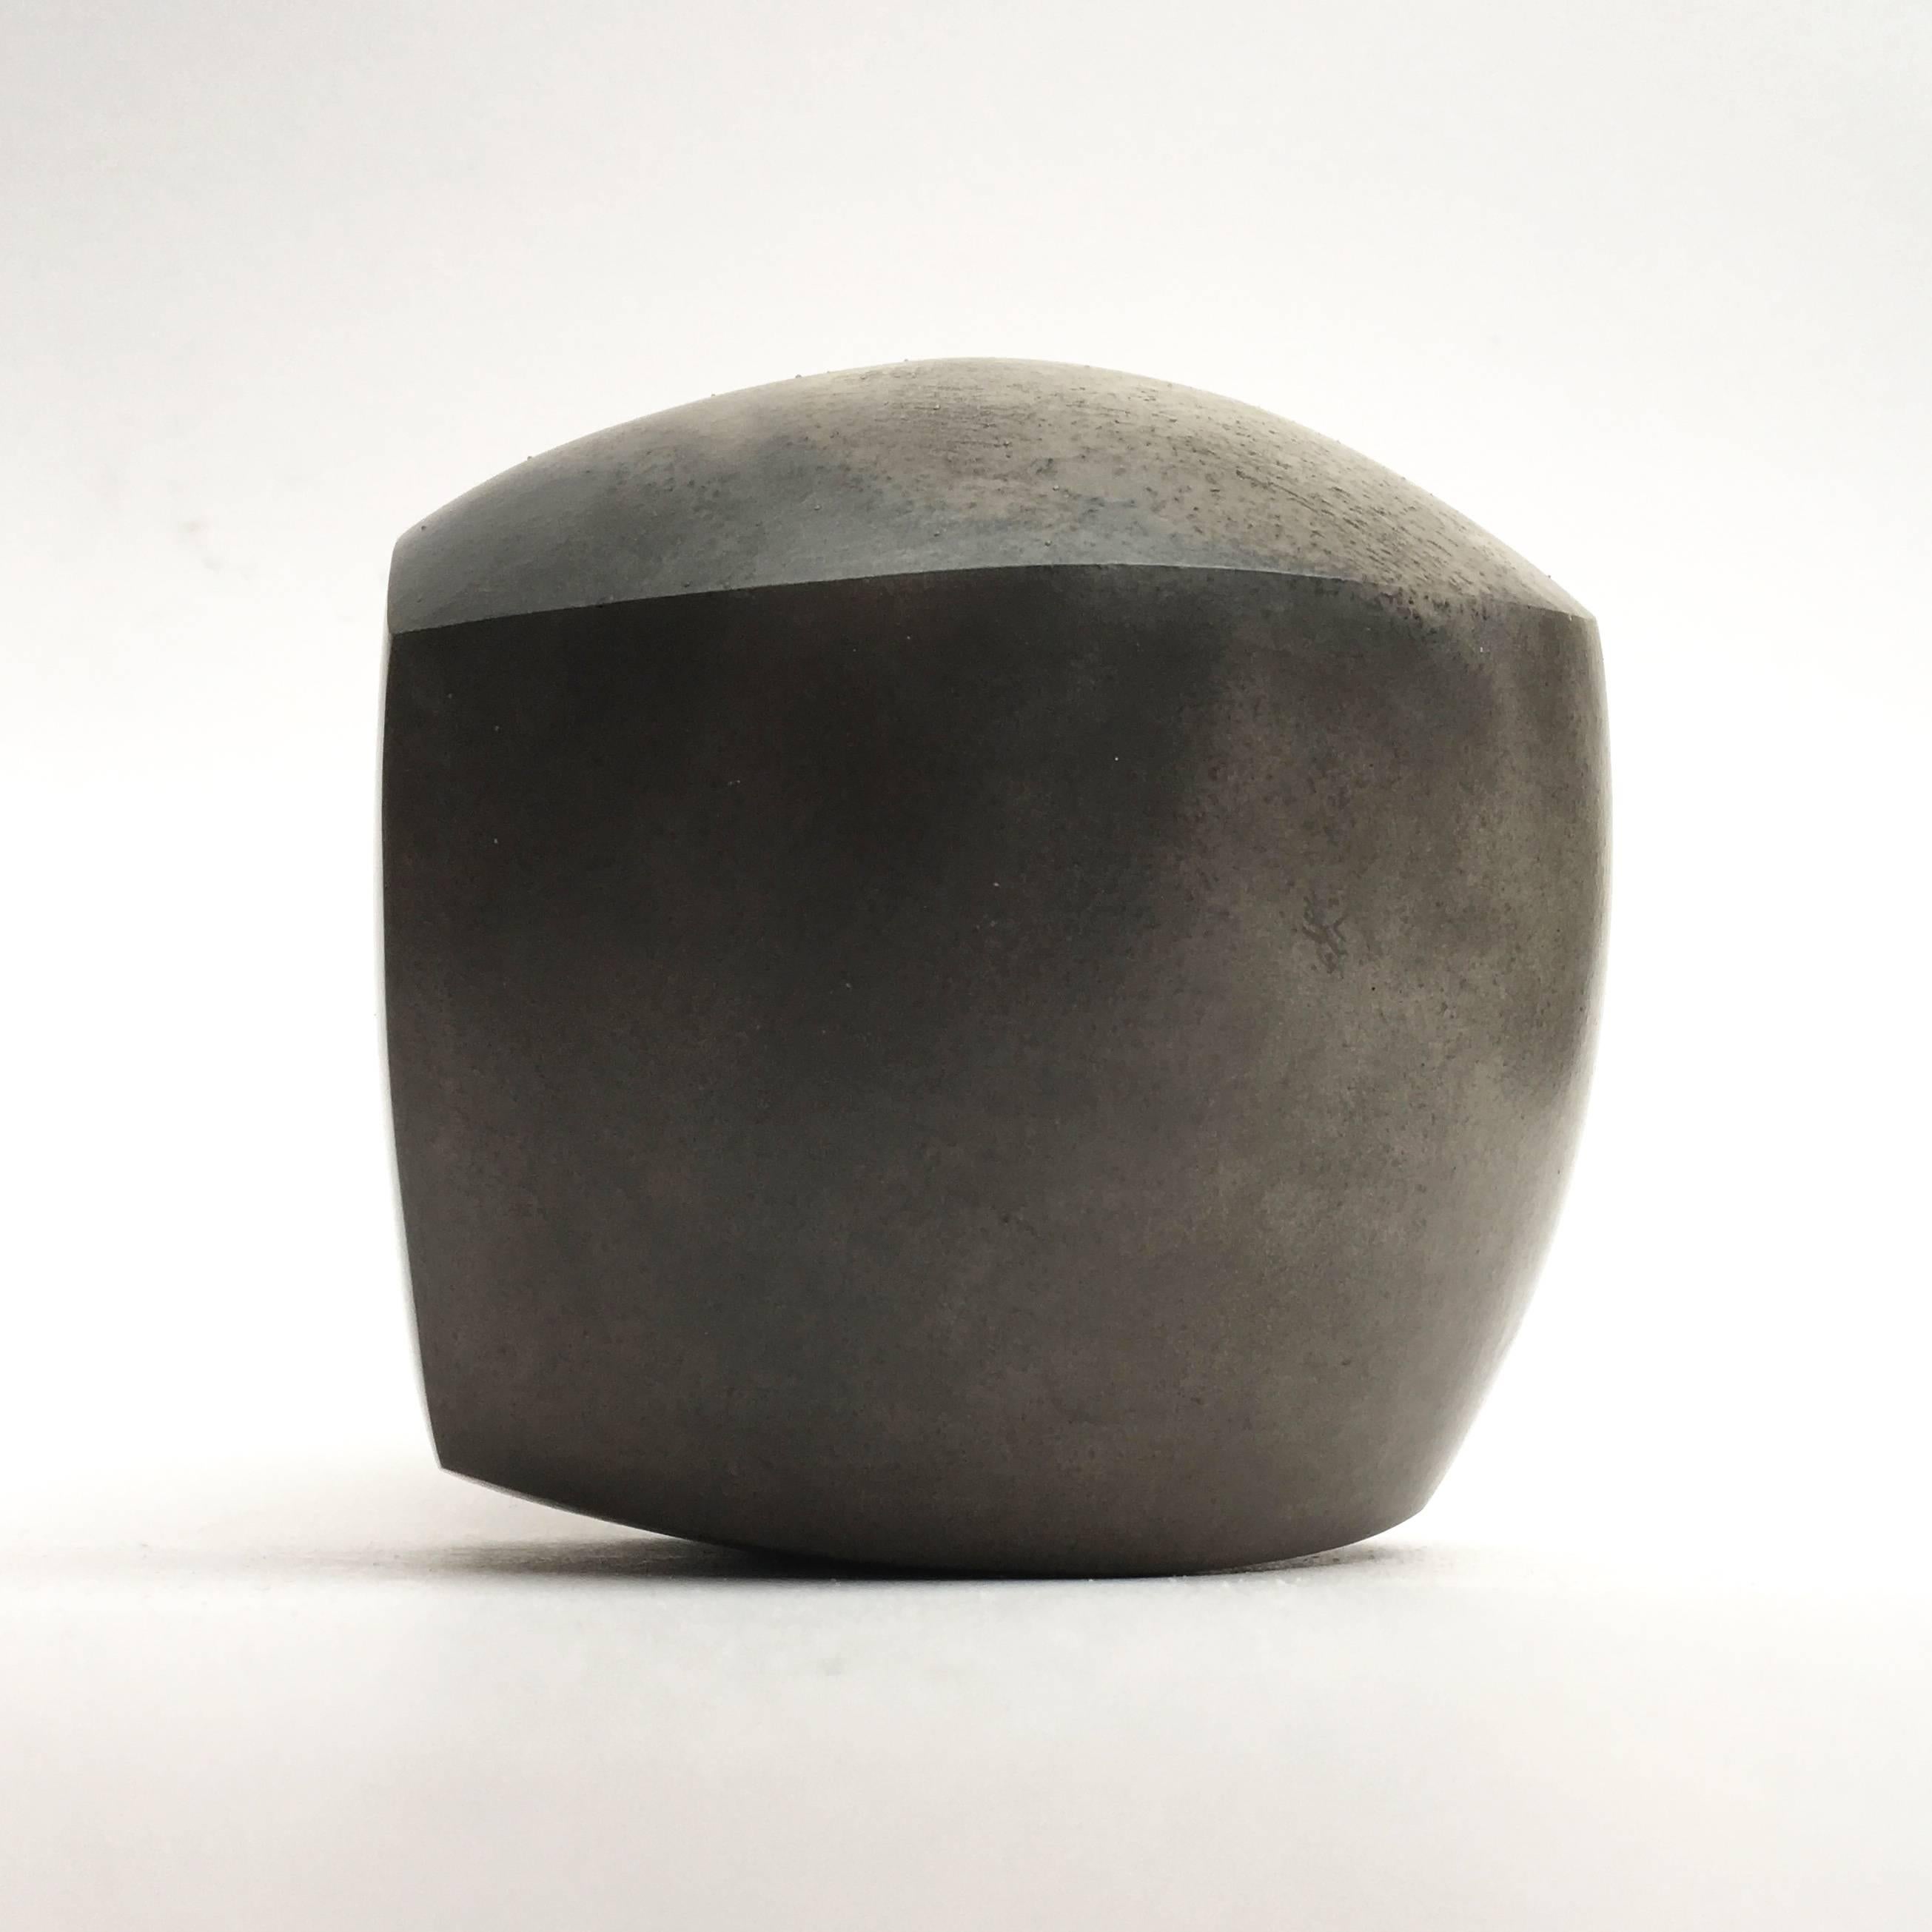 Amazing Kat Evans raku clay sculpture #1 (small) fired with coffee grounds. 

Asymmetrical sculptures speak of the processes that made them: pinching, coiling and paddling. Hours of careful and deliberate burnishing create a perfectly smooth